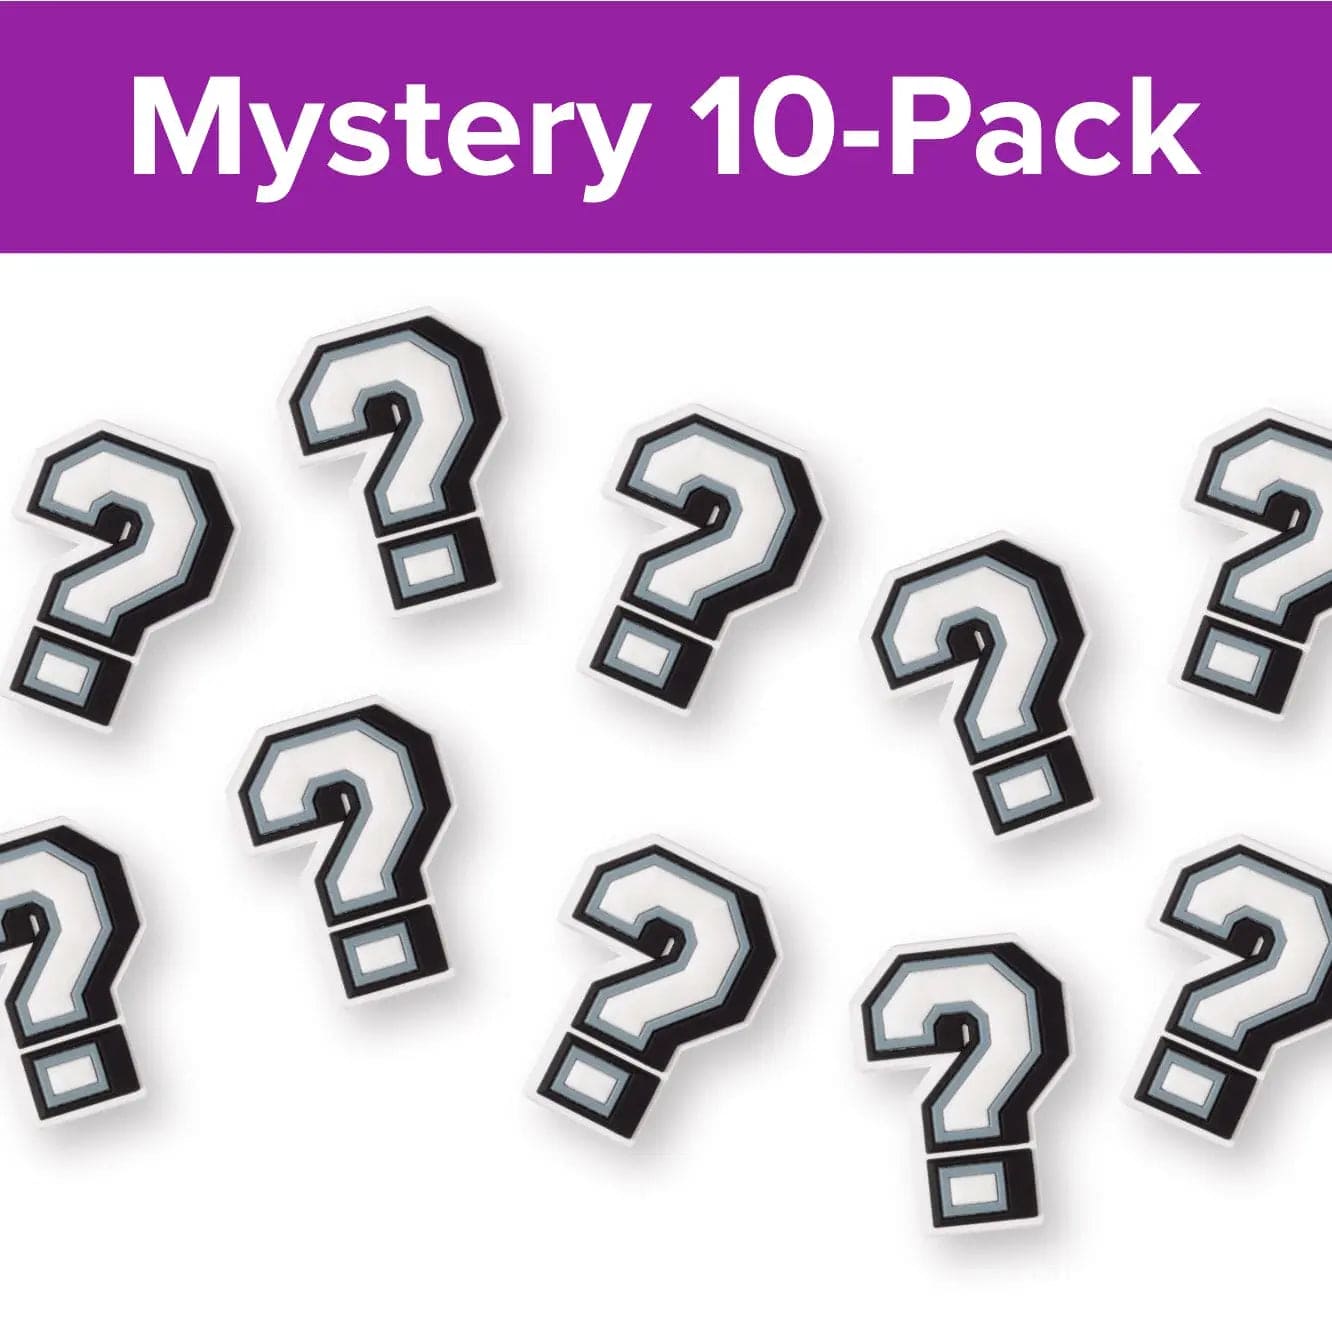 10-Pack Of Mystery Crocs Charm Charms By Prince